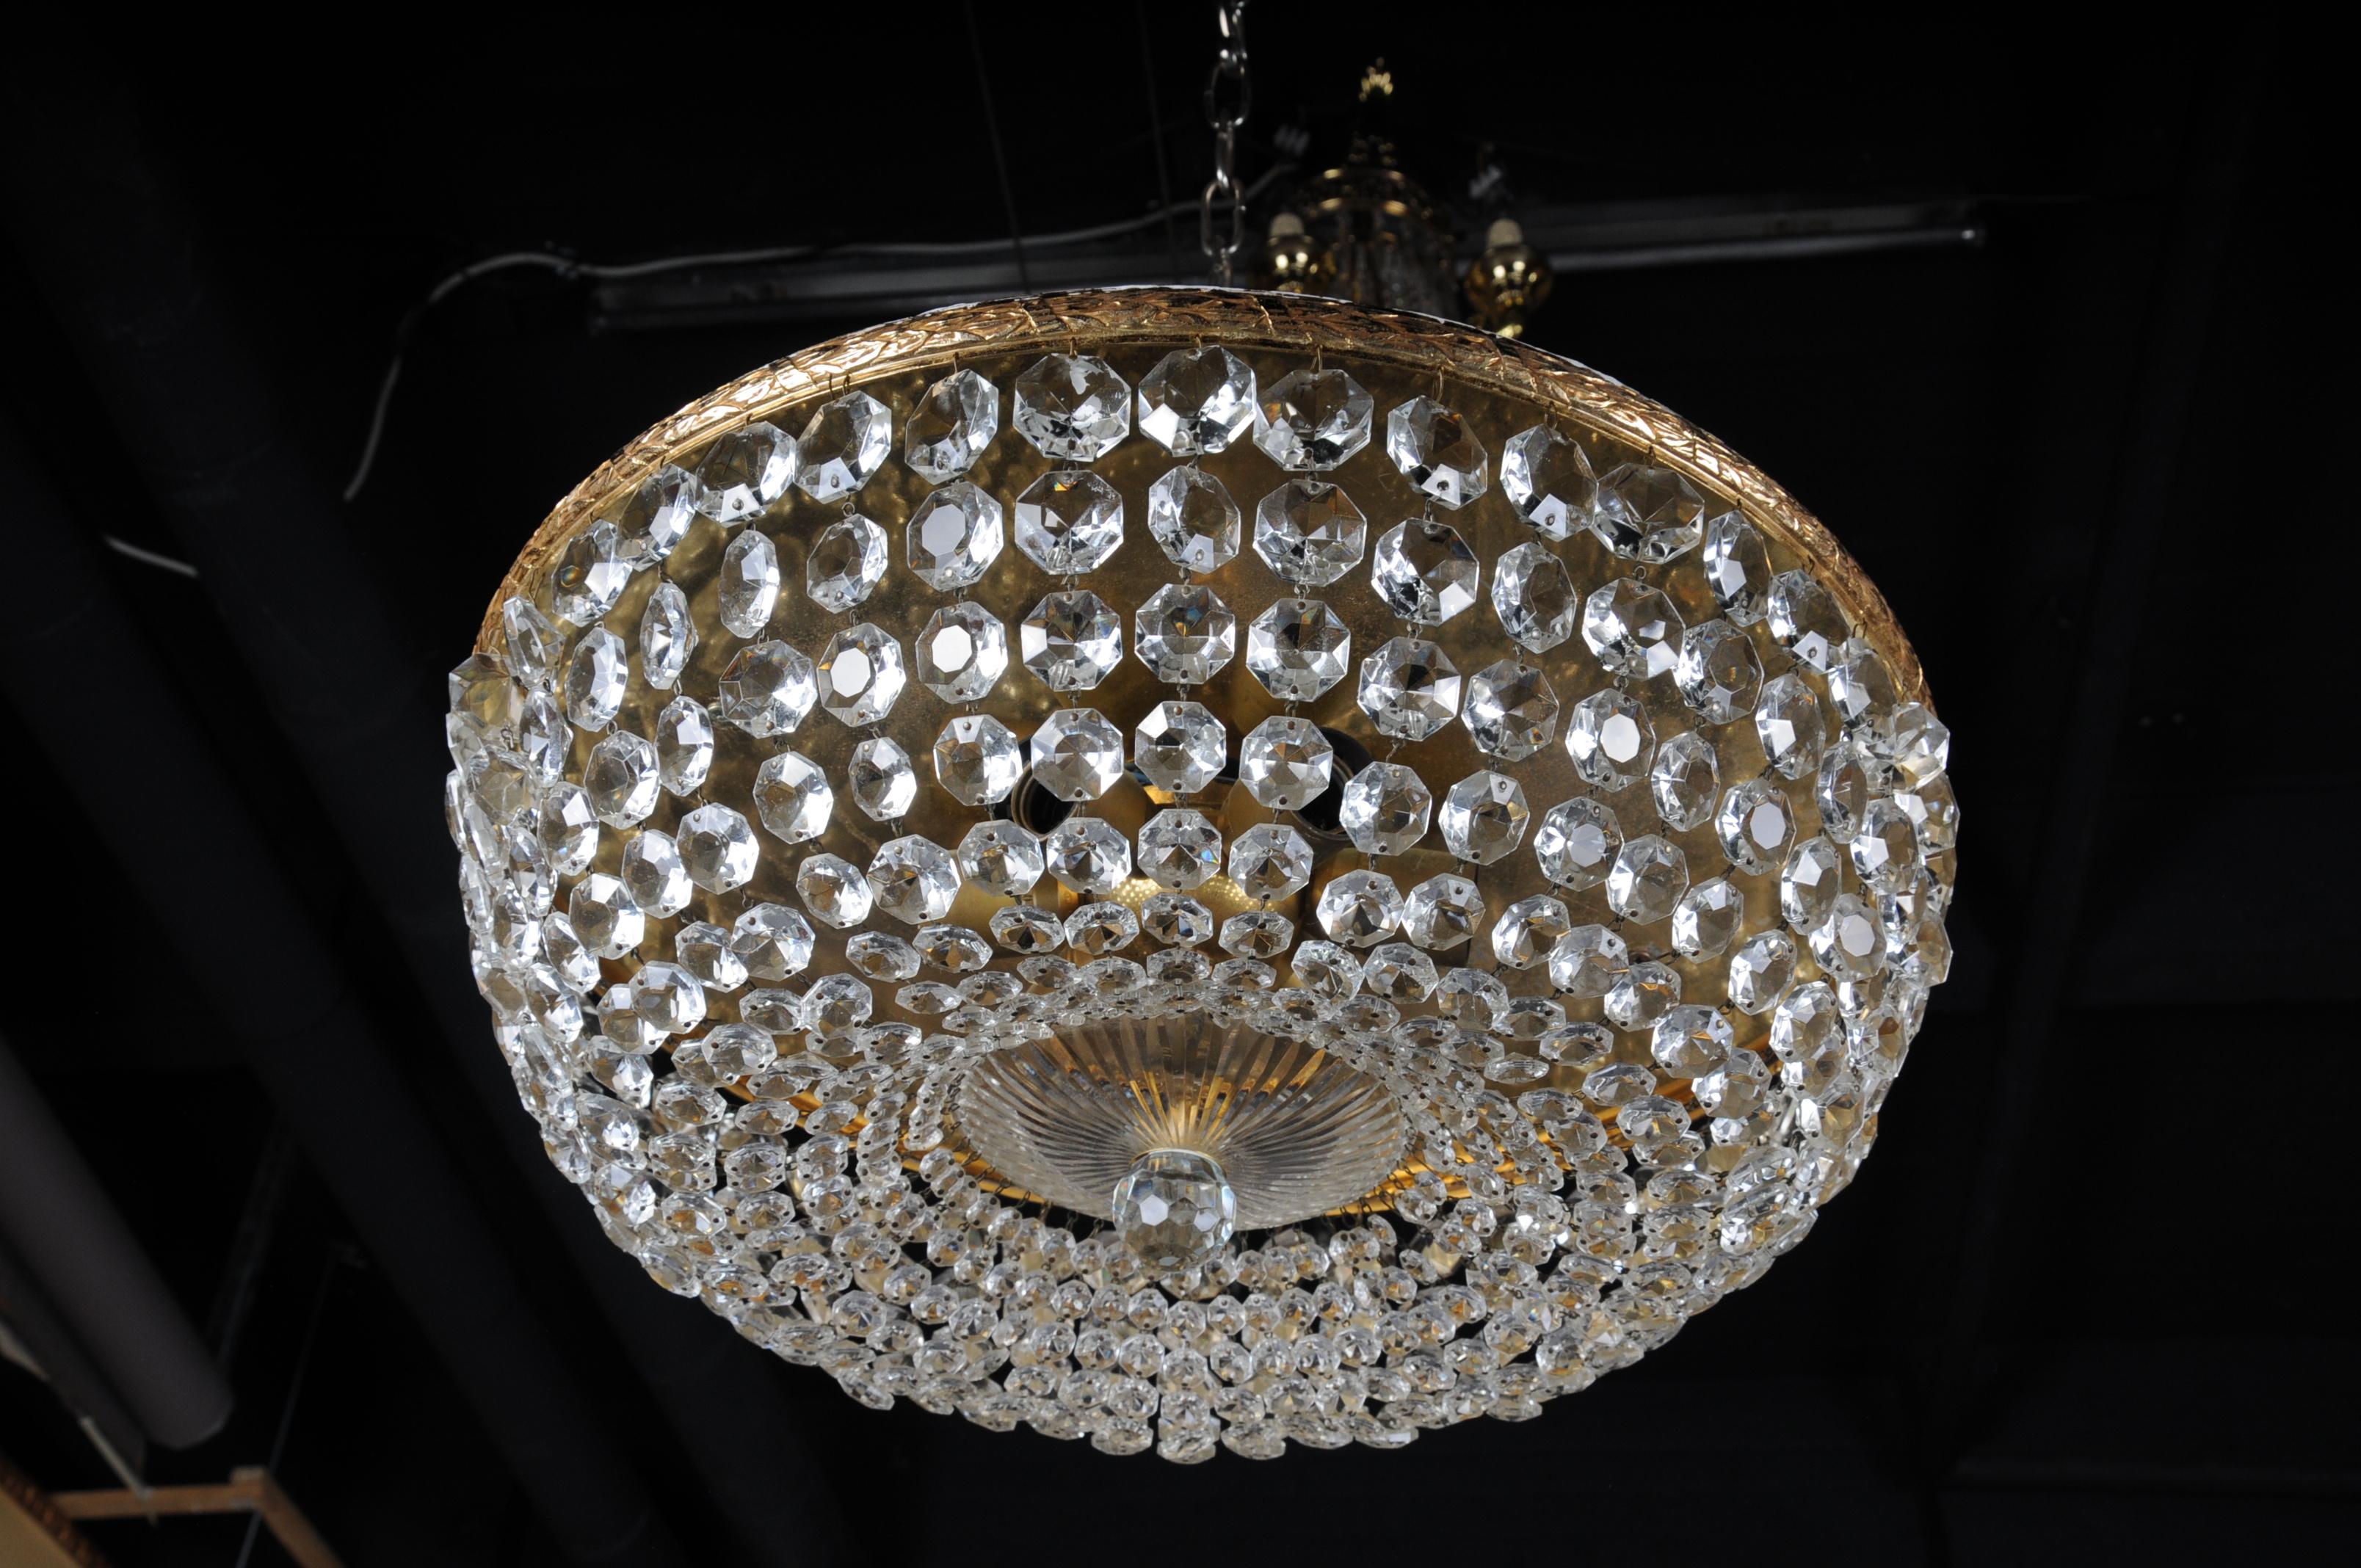 Classic, round ceiling lamp with crystal hangings. Polished brass plate. Extremely high quality workmanship.

(F-100).